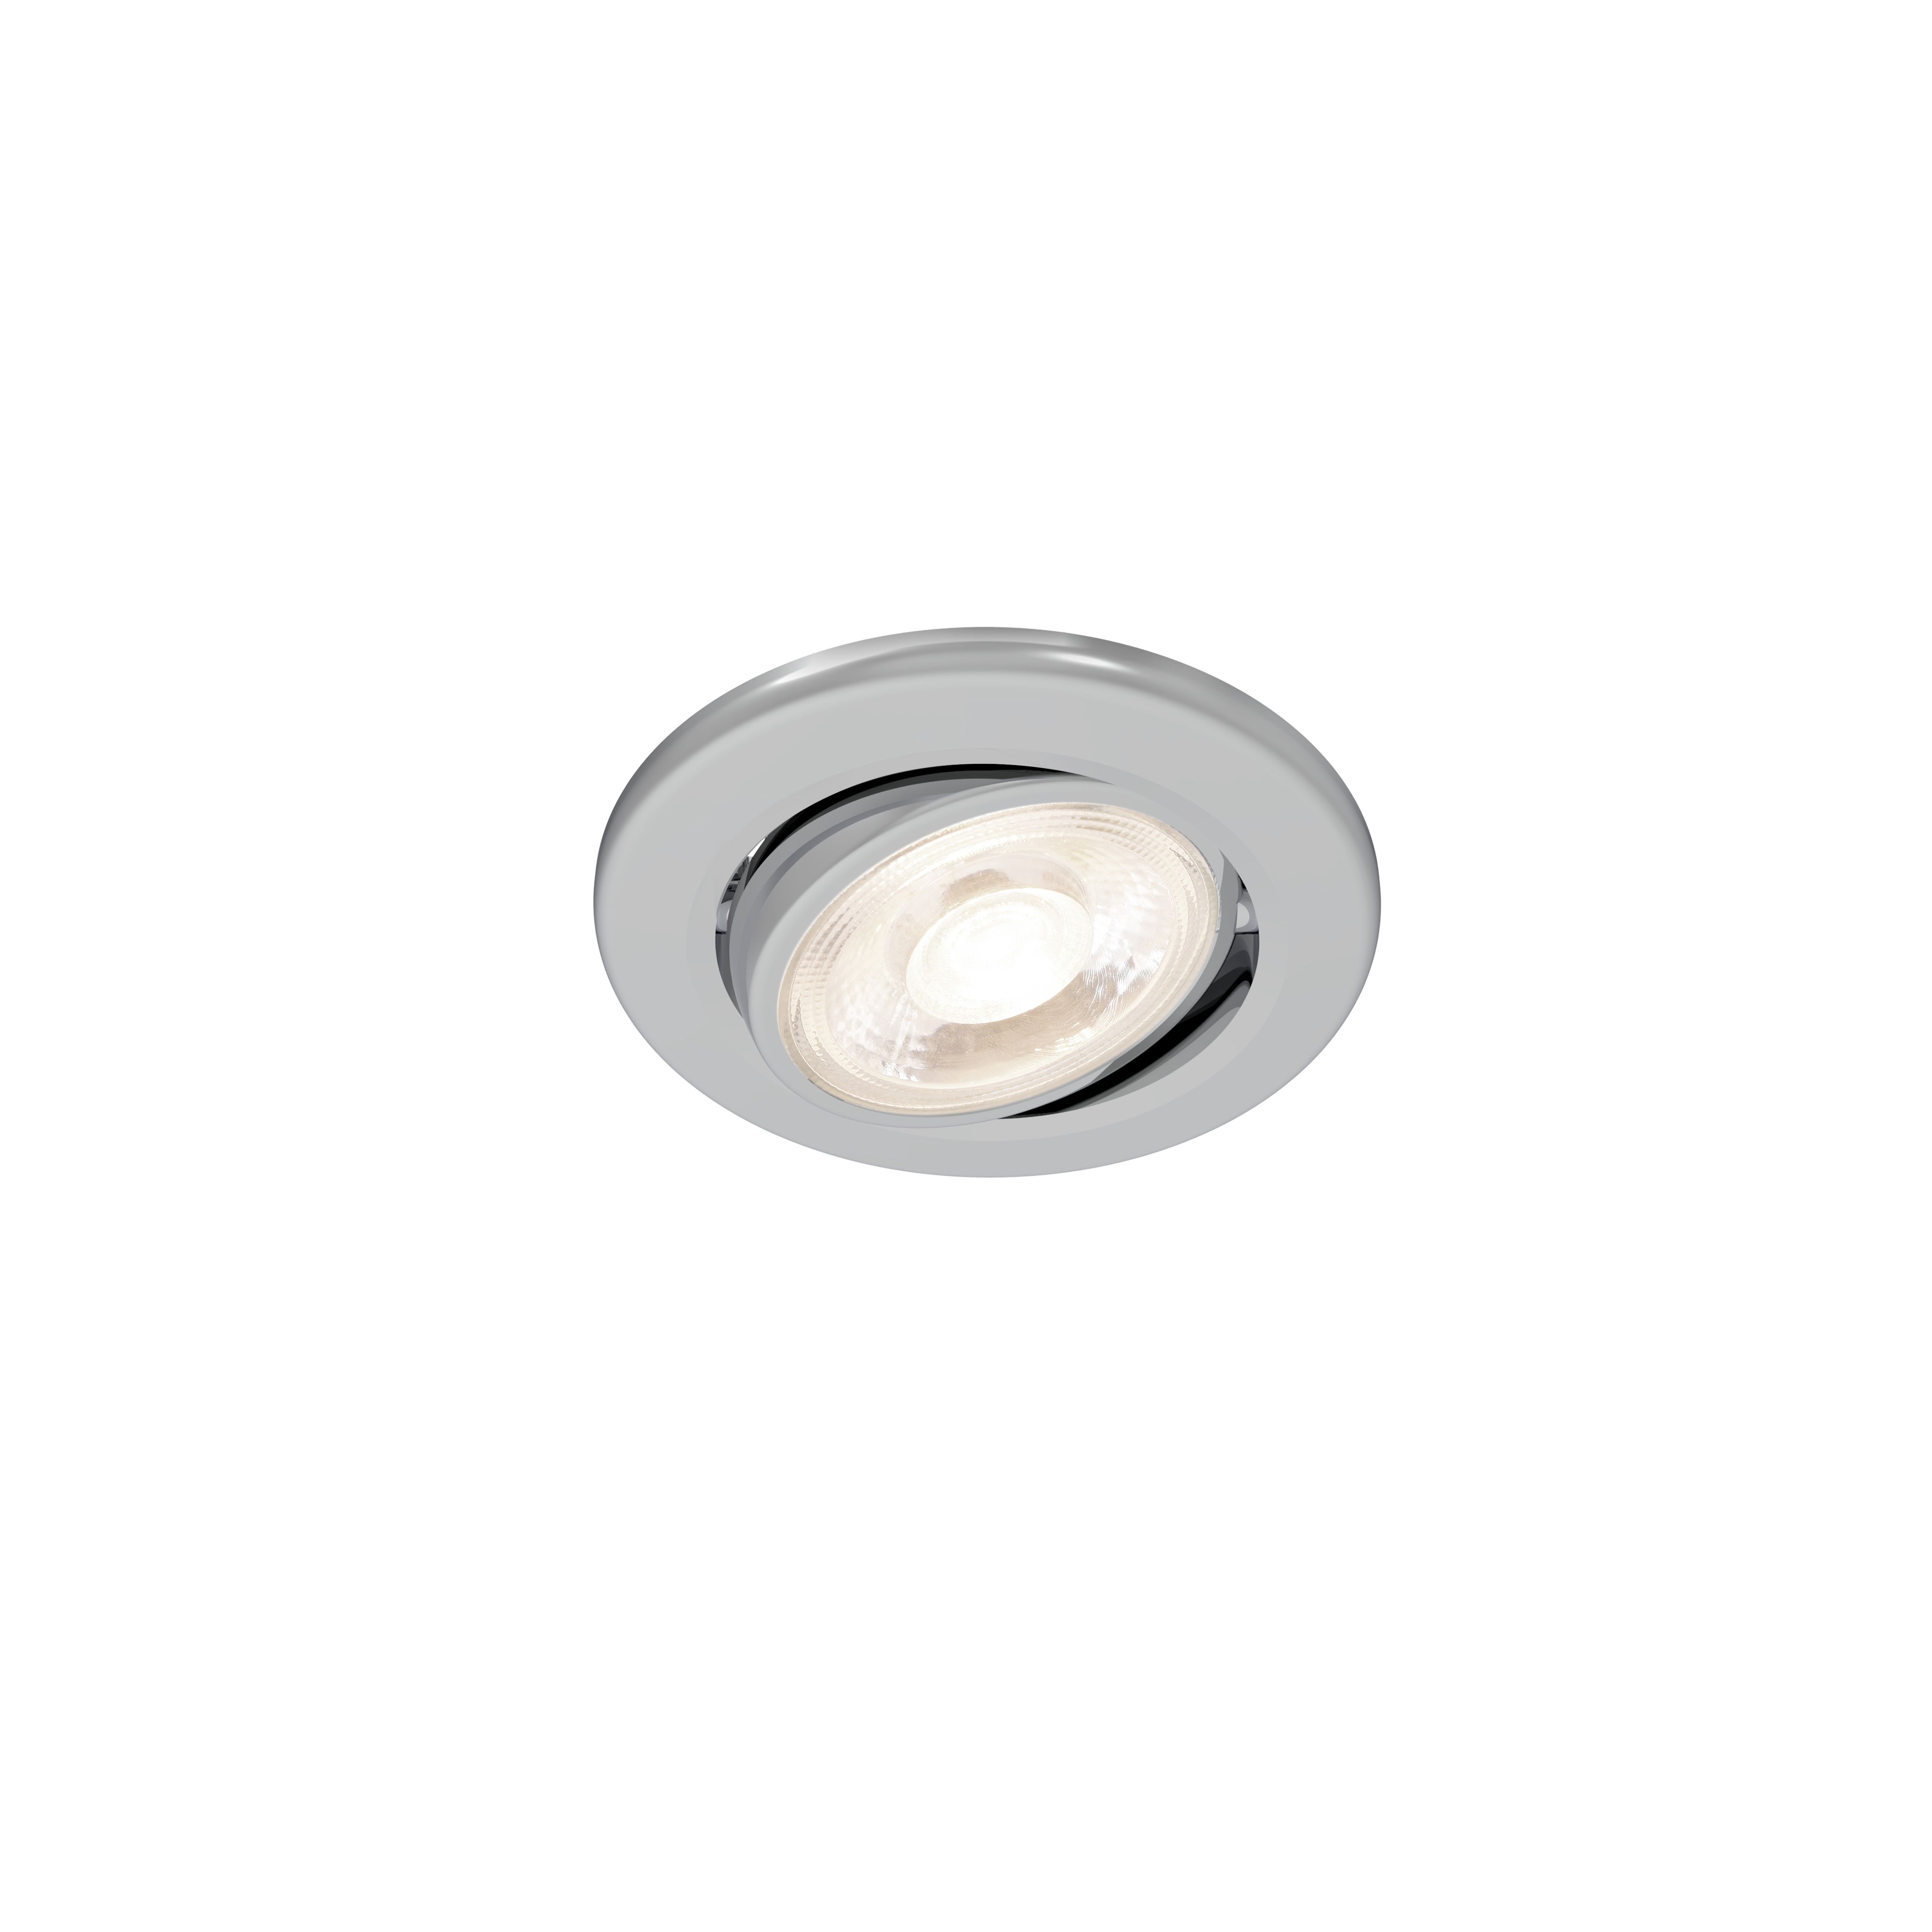 Arber Chrome effect Adjustable LED Fire-rated Warm & neutral Downlight 5W IP65, Pack of 6